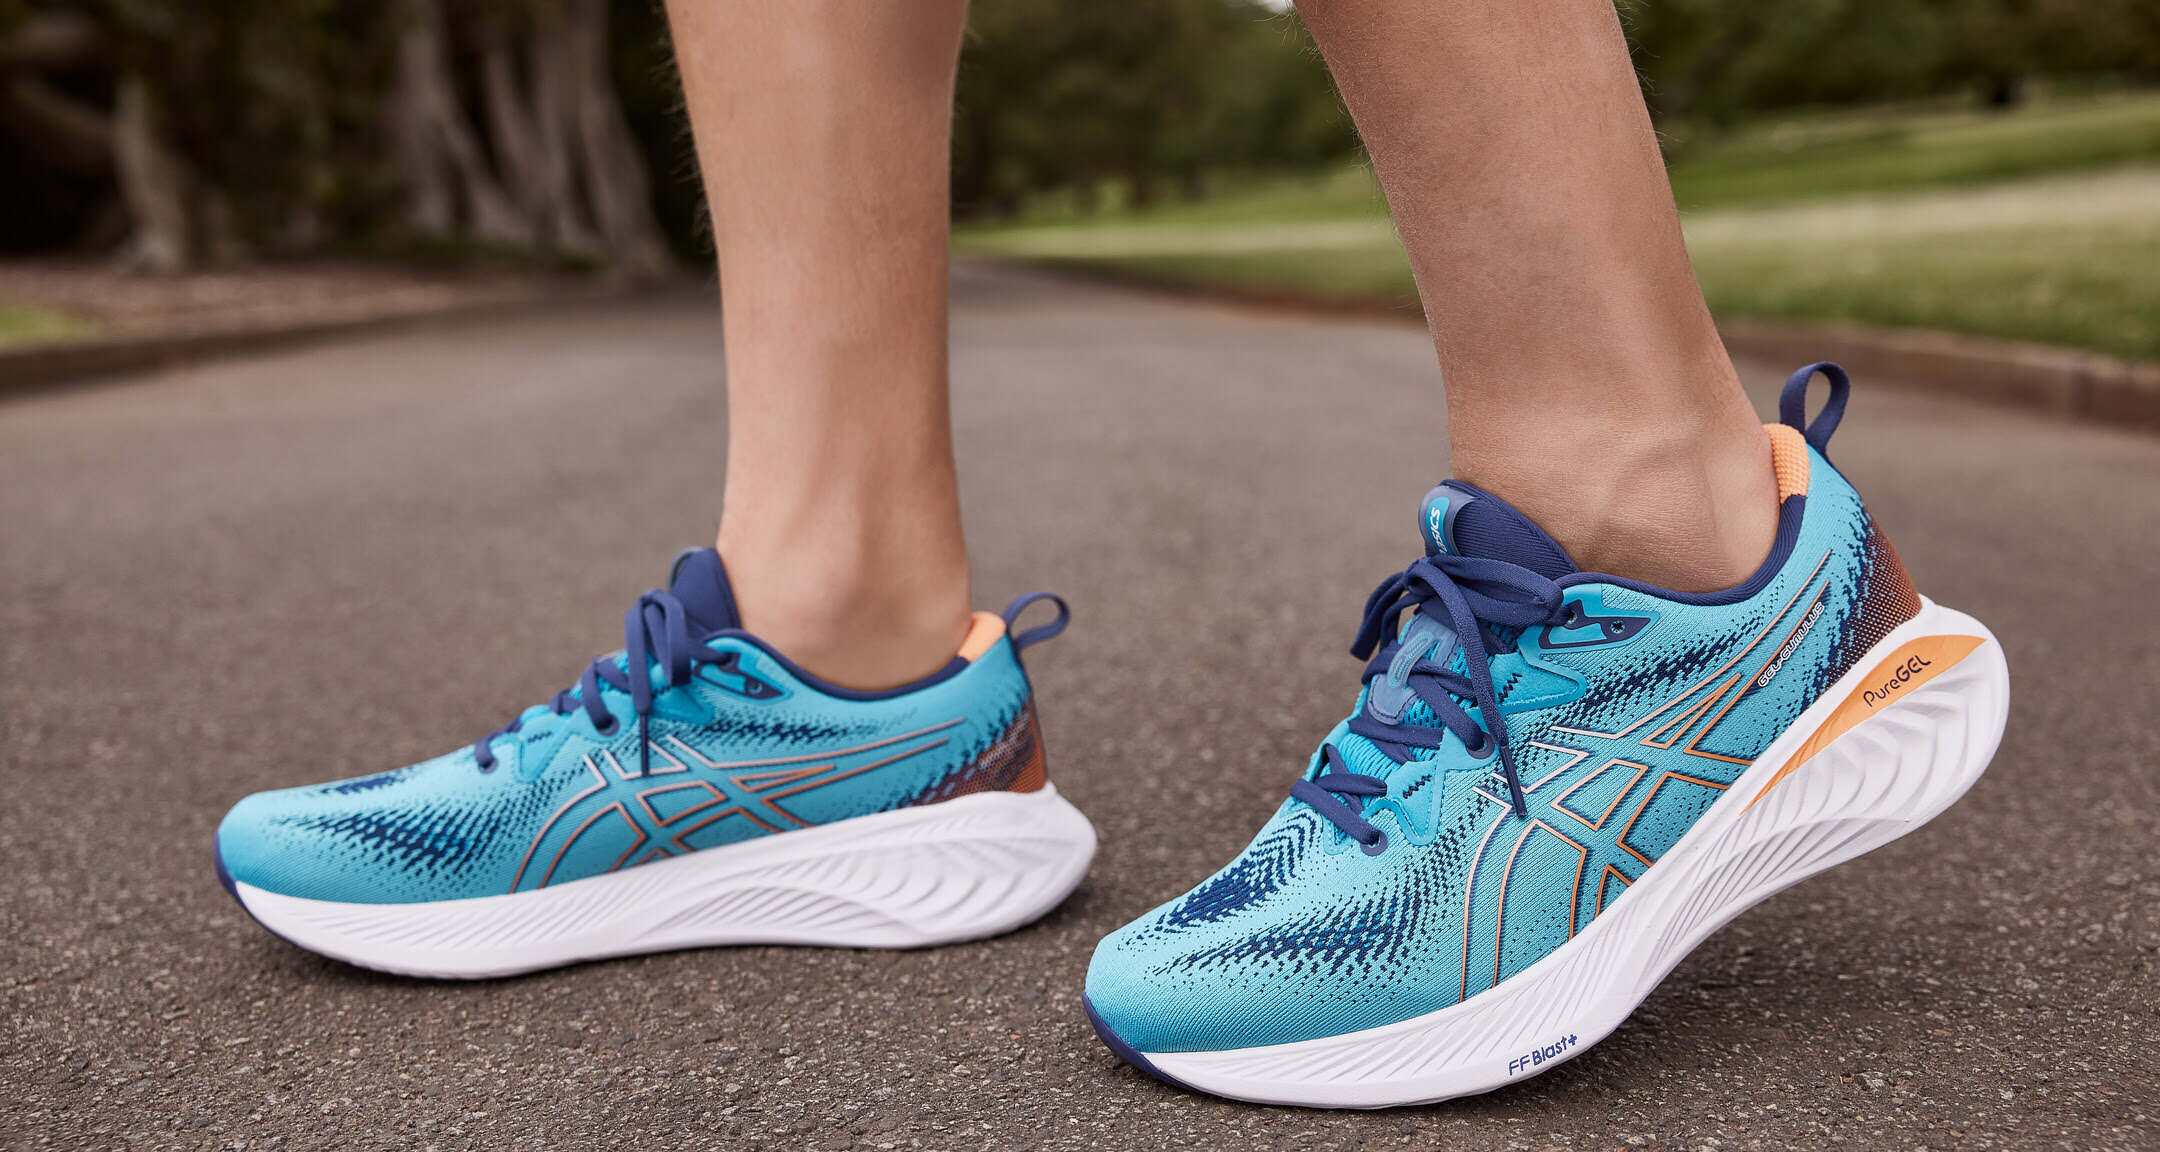 Best running shoes for bad knees